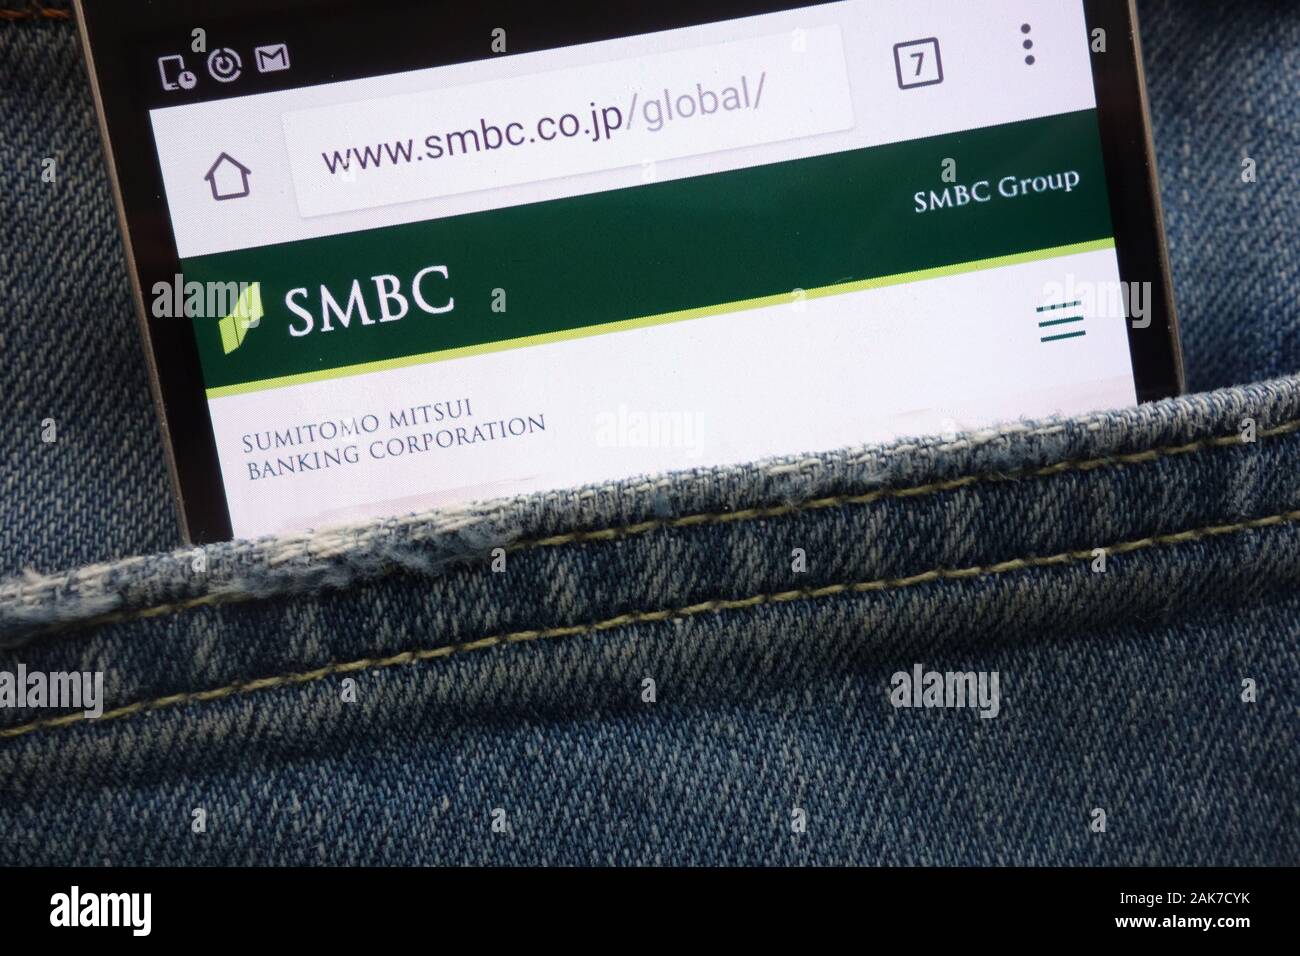 Sumitomo Mitsui Banking Corporation (SMBC) website displayed on smartphone hidden in jeans pocket Stock Photo